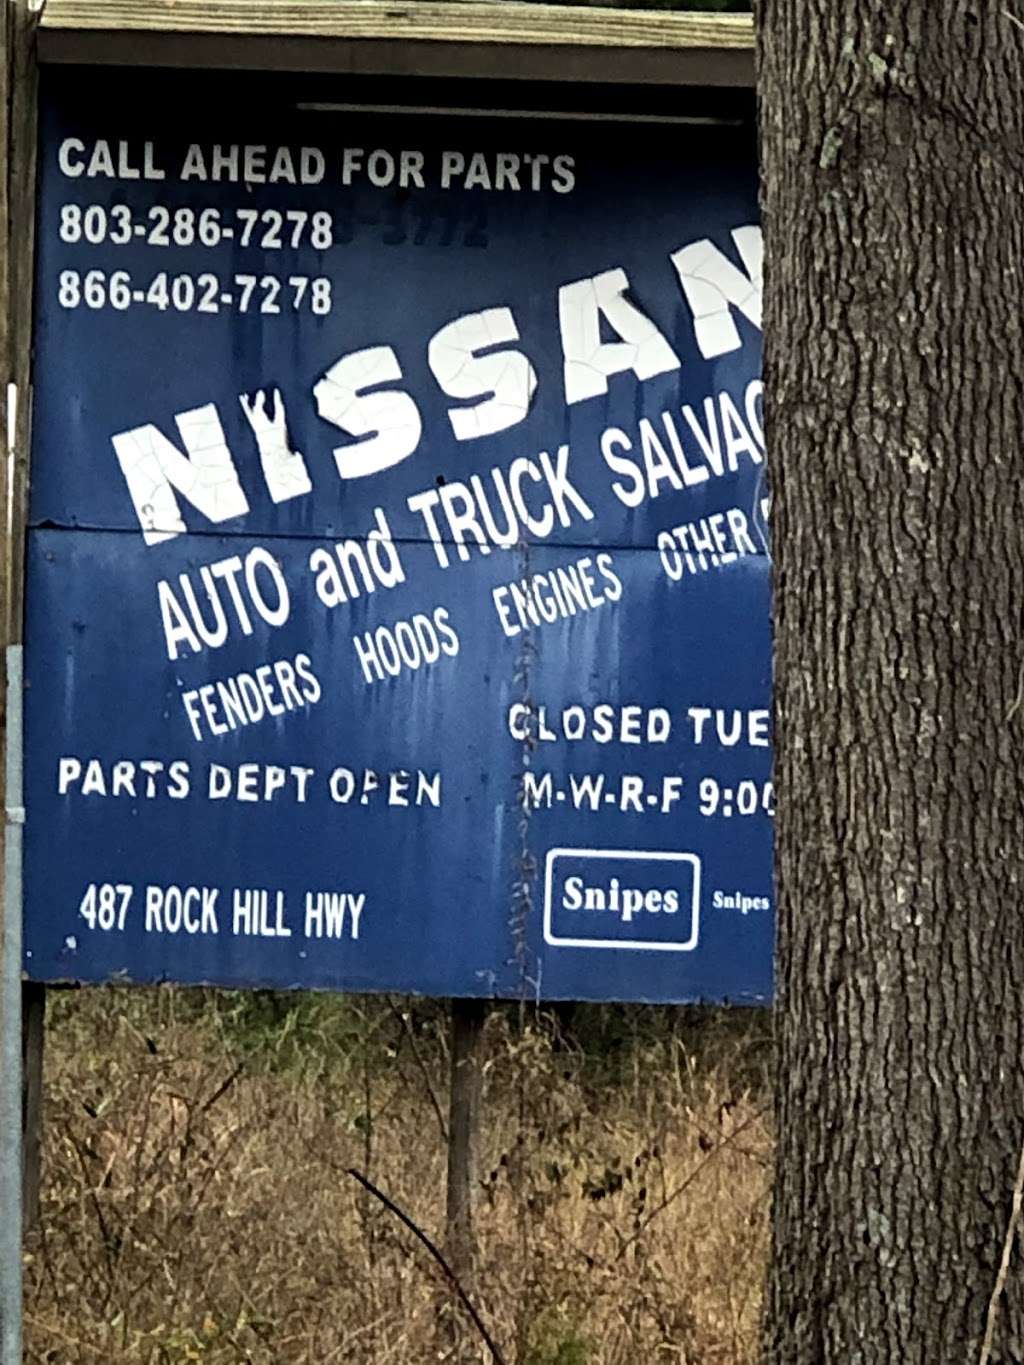 Nissan Auto And Truck Salvage - car repair  | Photo 1 of 1 | Address: 487 Rock Hill Hwy, Lancaster, SC 29720, USA | Phone: (803) 286-7278